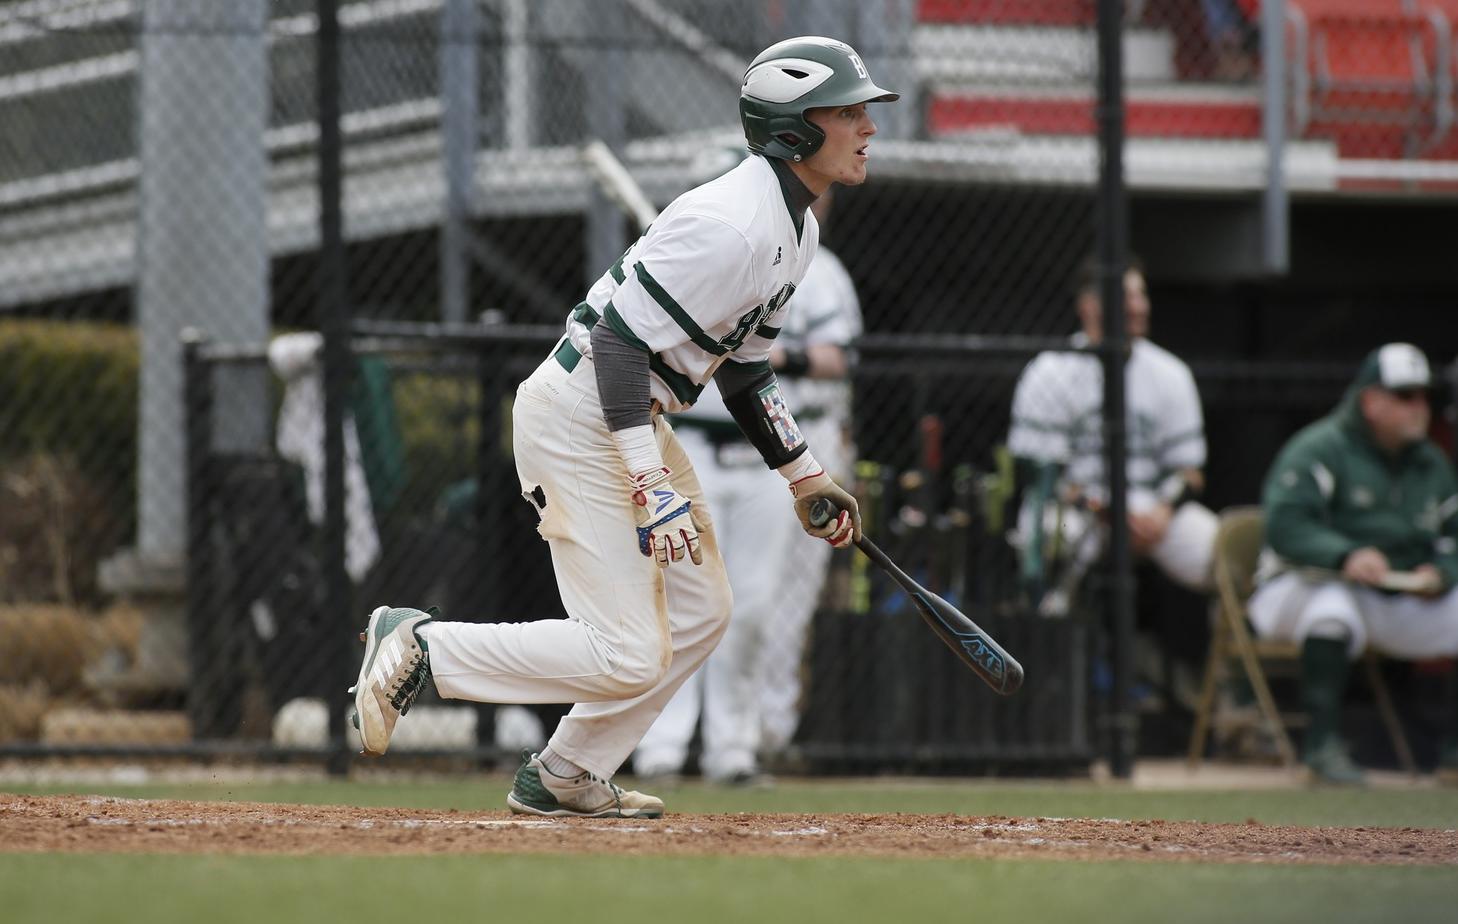 Baseball scores 21 runs in sweep of Chatham